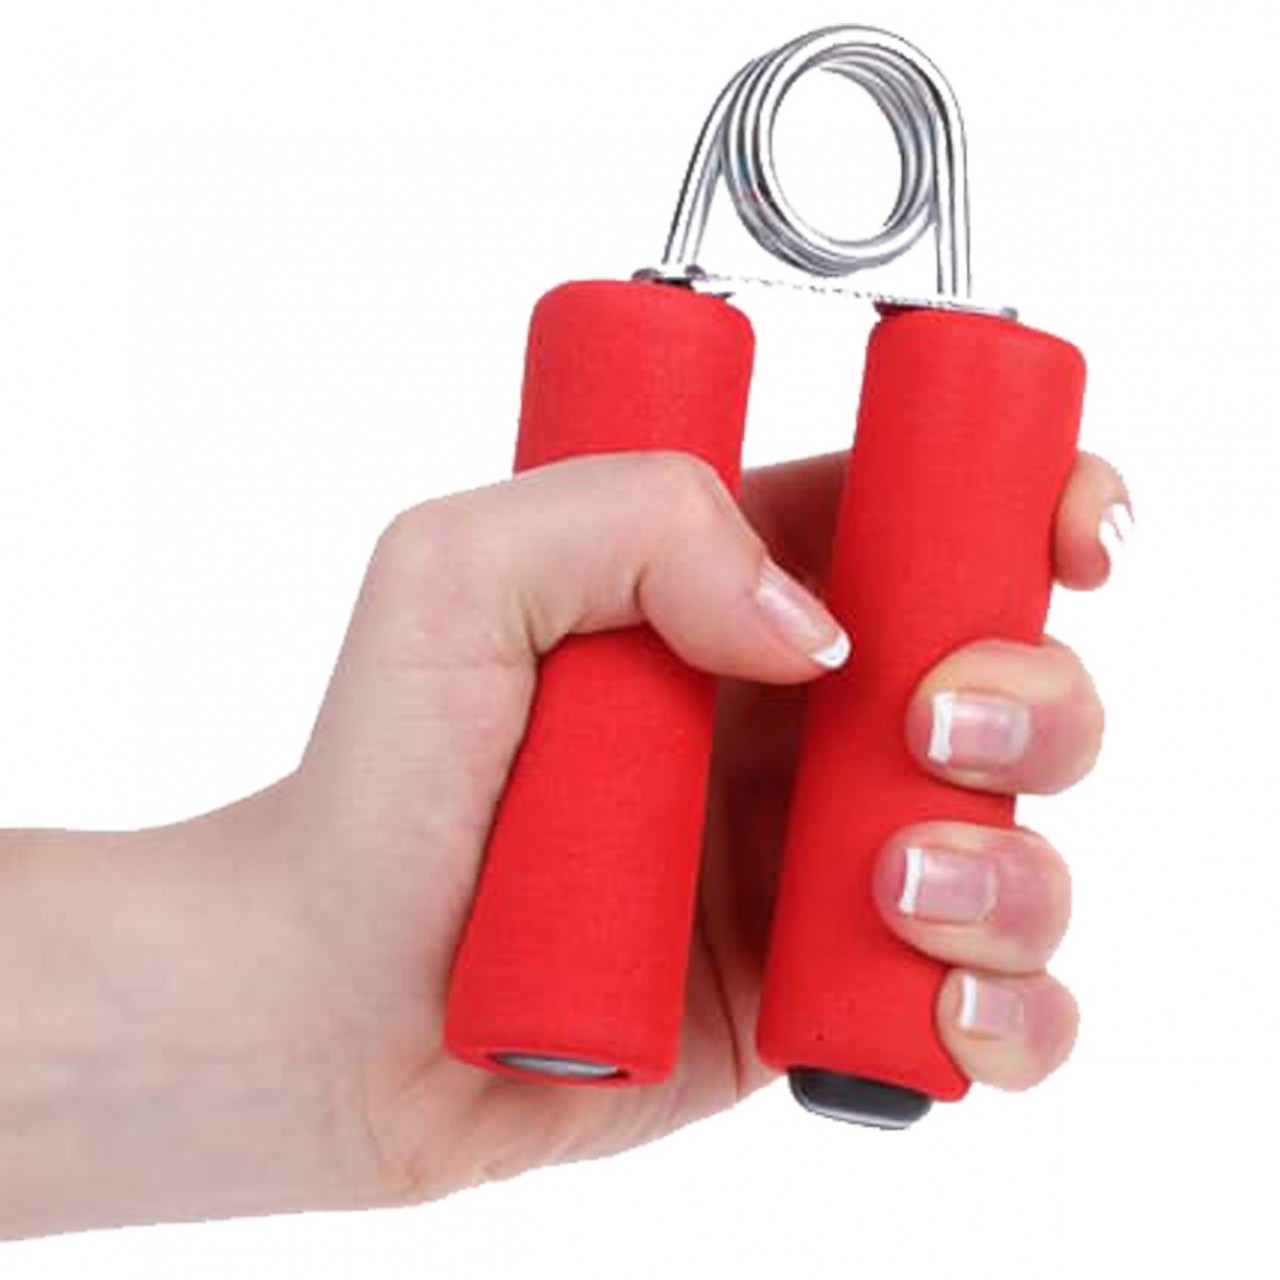 Grip Strength For Fingers - Strengthen Muscles